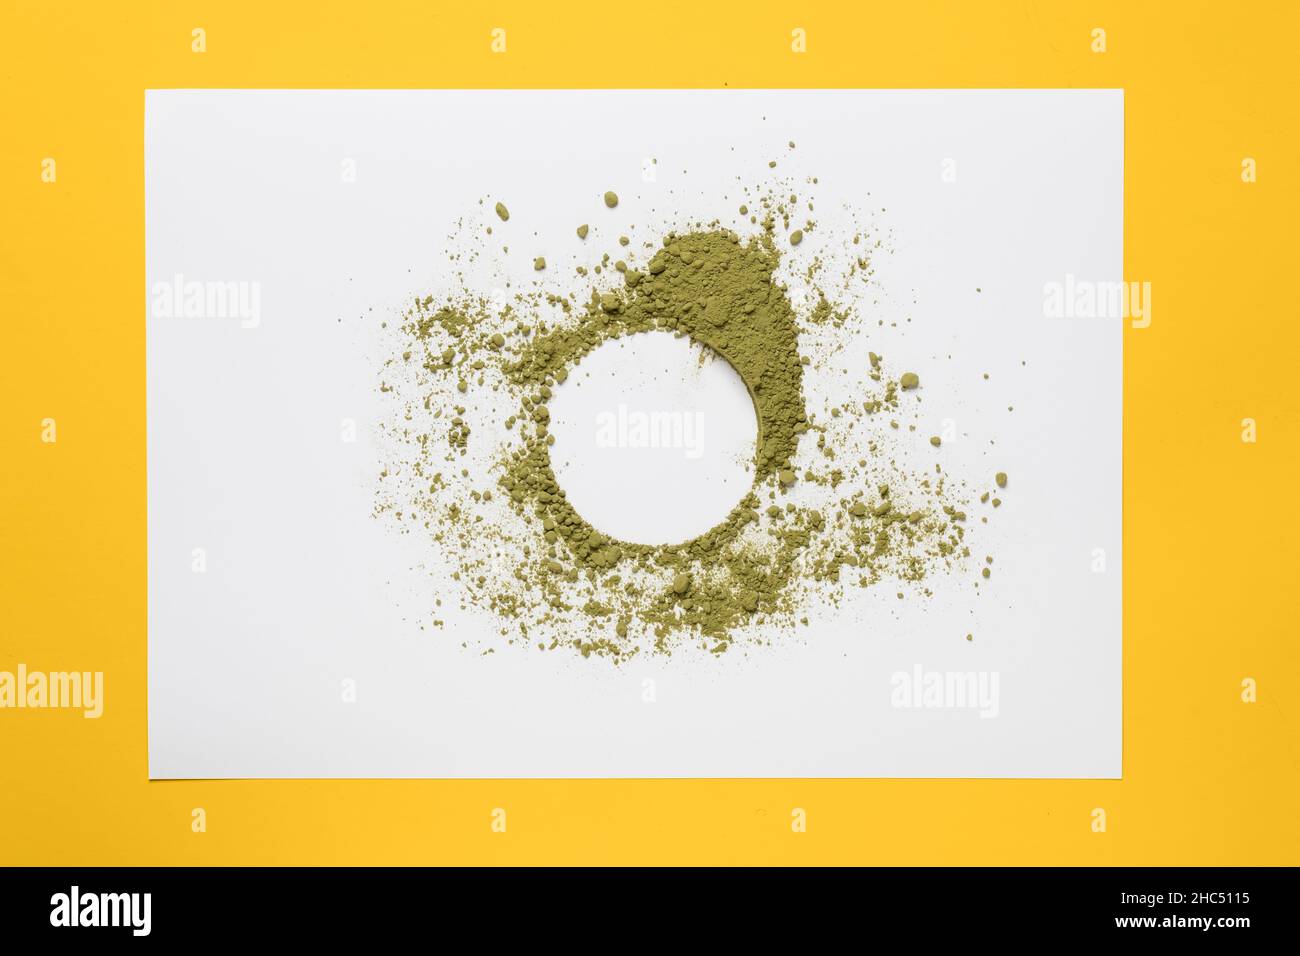 Circle of green powder scattered on a sheet of white paper, on a yellow background. Copy space. Bright dry paint.  Stock Photo